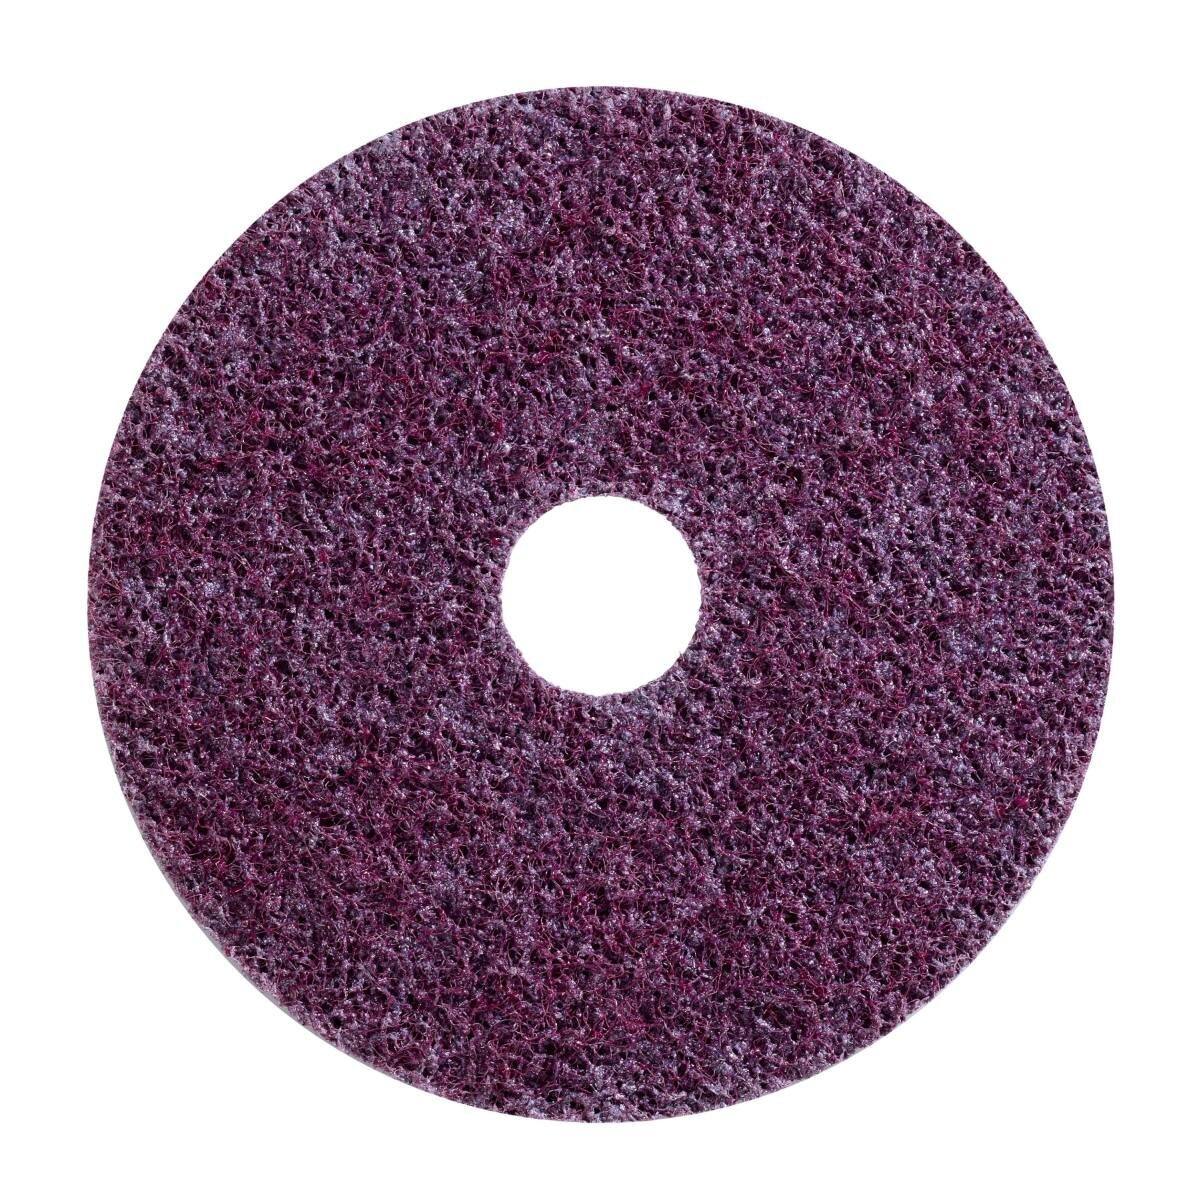 3M Scotch-Brite non-woven disc GB-DH with centering, red-brown, 115 mm, 22 mm, coarse heavy duty #60332